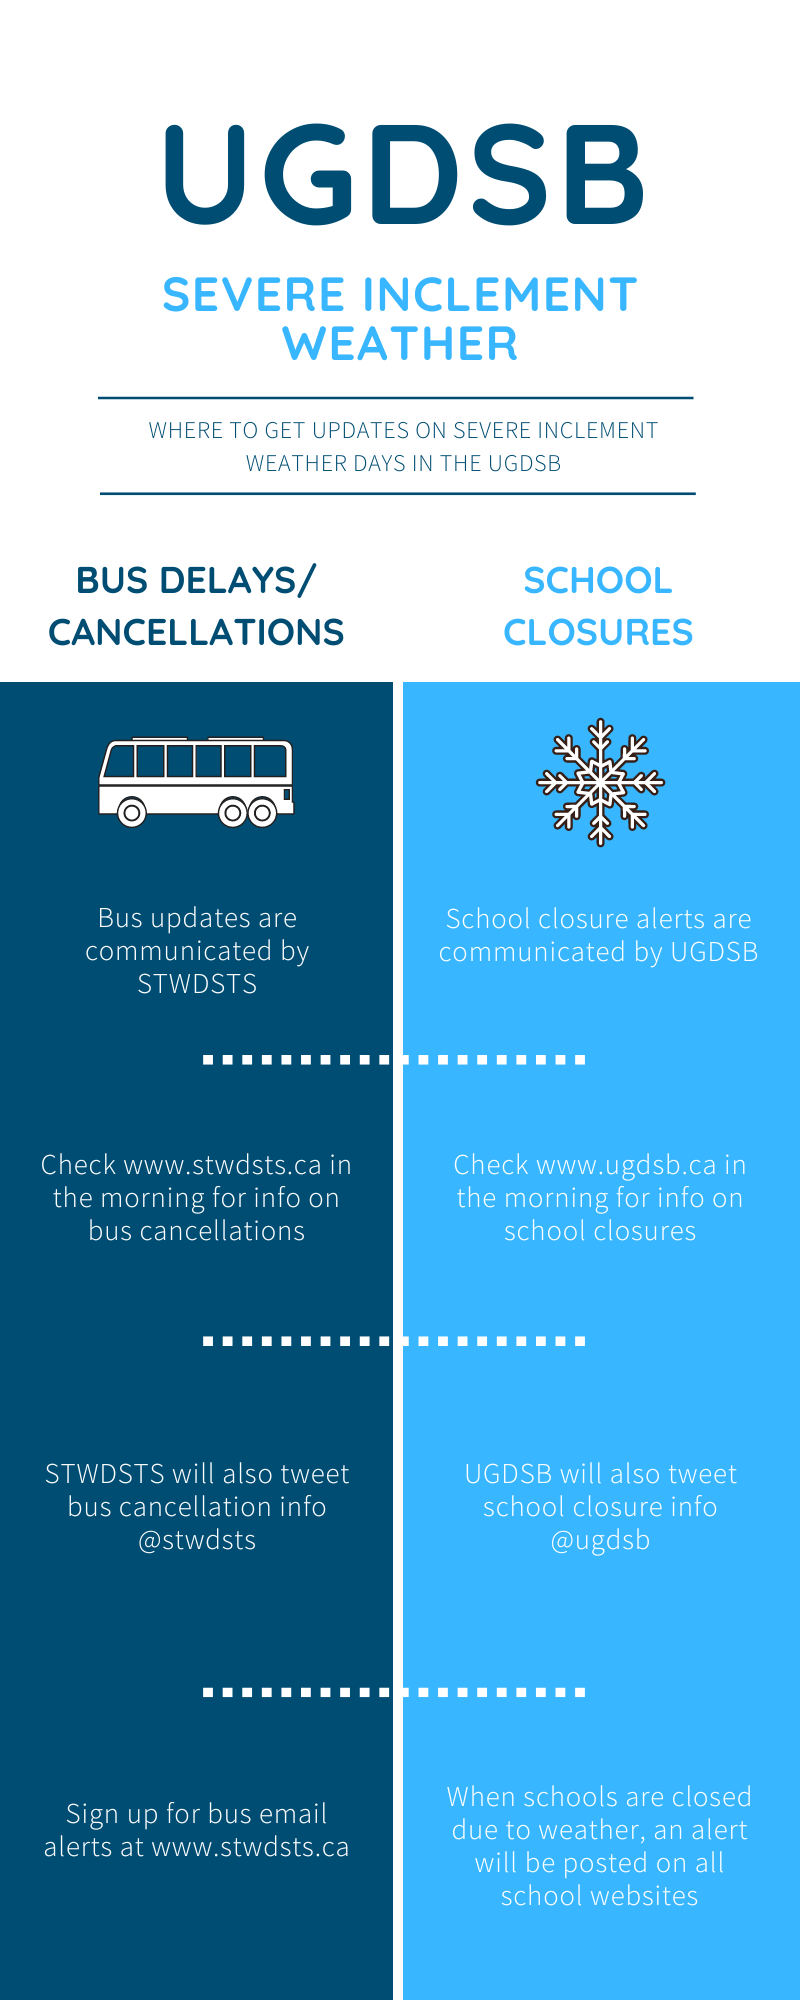 UGDSB Inclement Weather Infographic